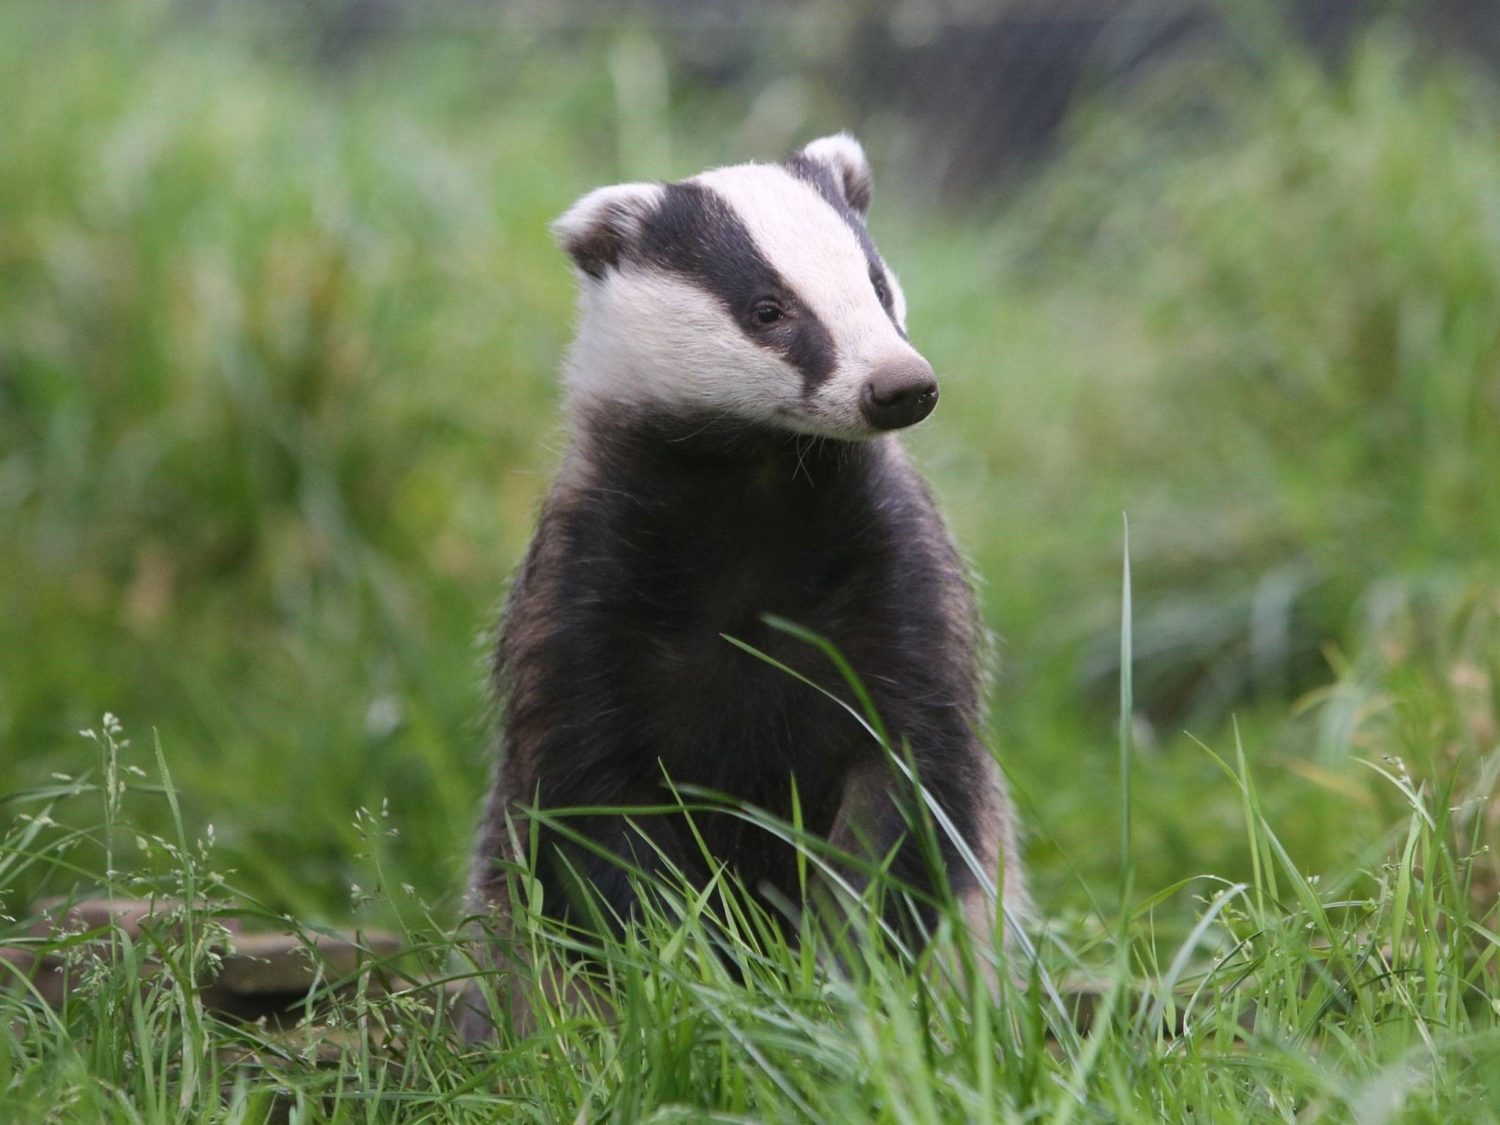 A badger standing on grass while looking into the distance